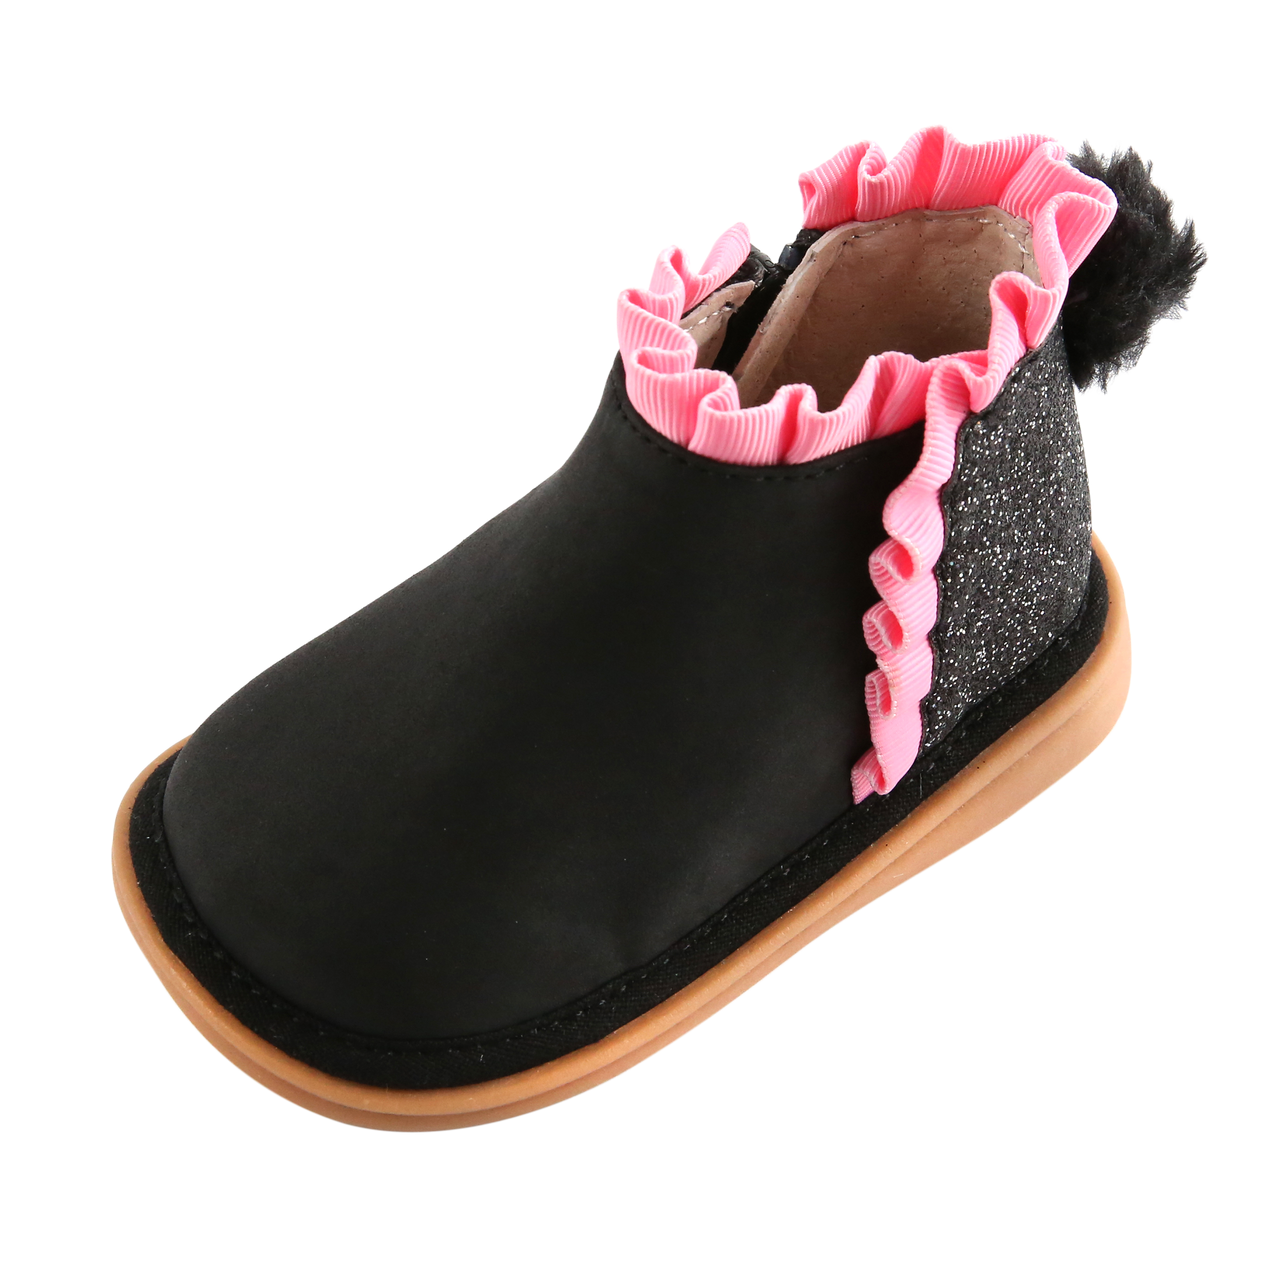 Remi Boot | Toddler Squeaky Shoes | mooshu TRAINERS | Let’s embrace the cooler weather with this hip little sparkly boot. Your little one will be the talk of the playground! These boots offer comfort, fun and a side of adventure. Let’s go play outside!